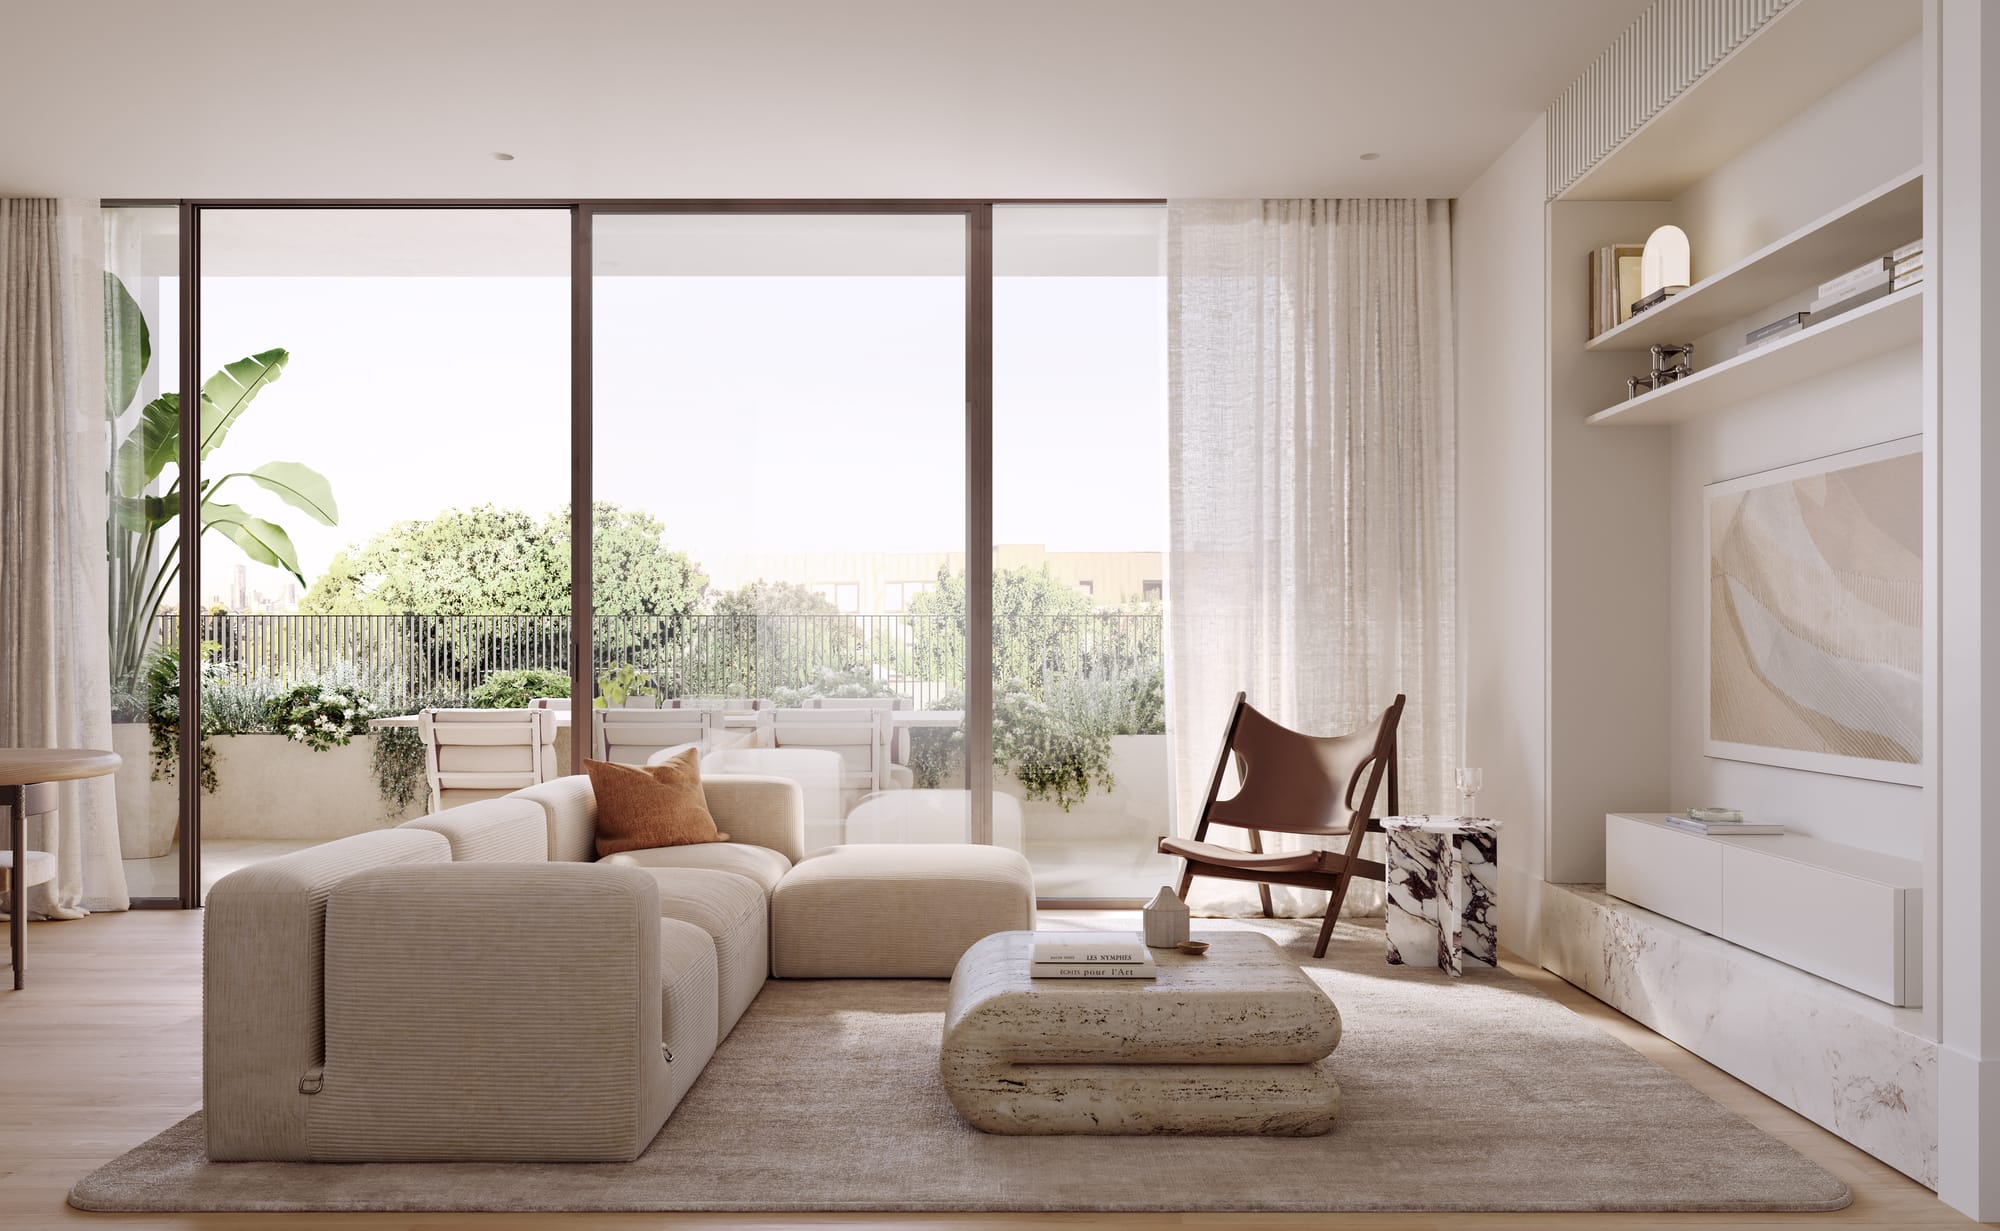 Sculpt Hawthorn by Mim Design, Parallel Workshop and Jack Merlo. Render copyright of Studio Piper. Living space with timber floors, neutral rug and furniture. Floor-to-ceiling windows. 